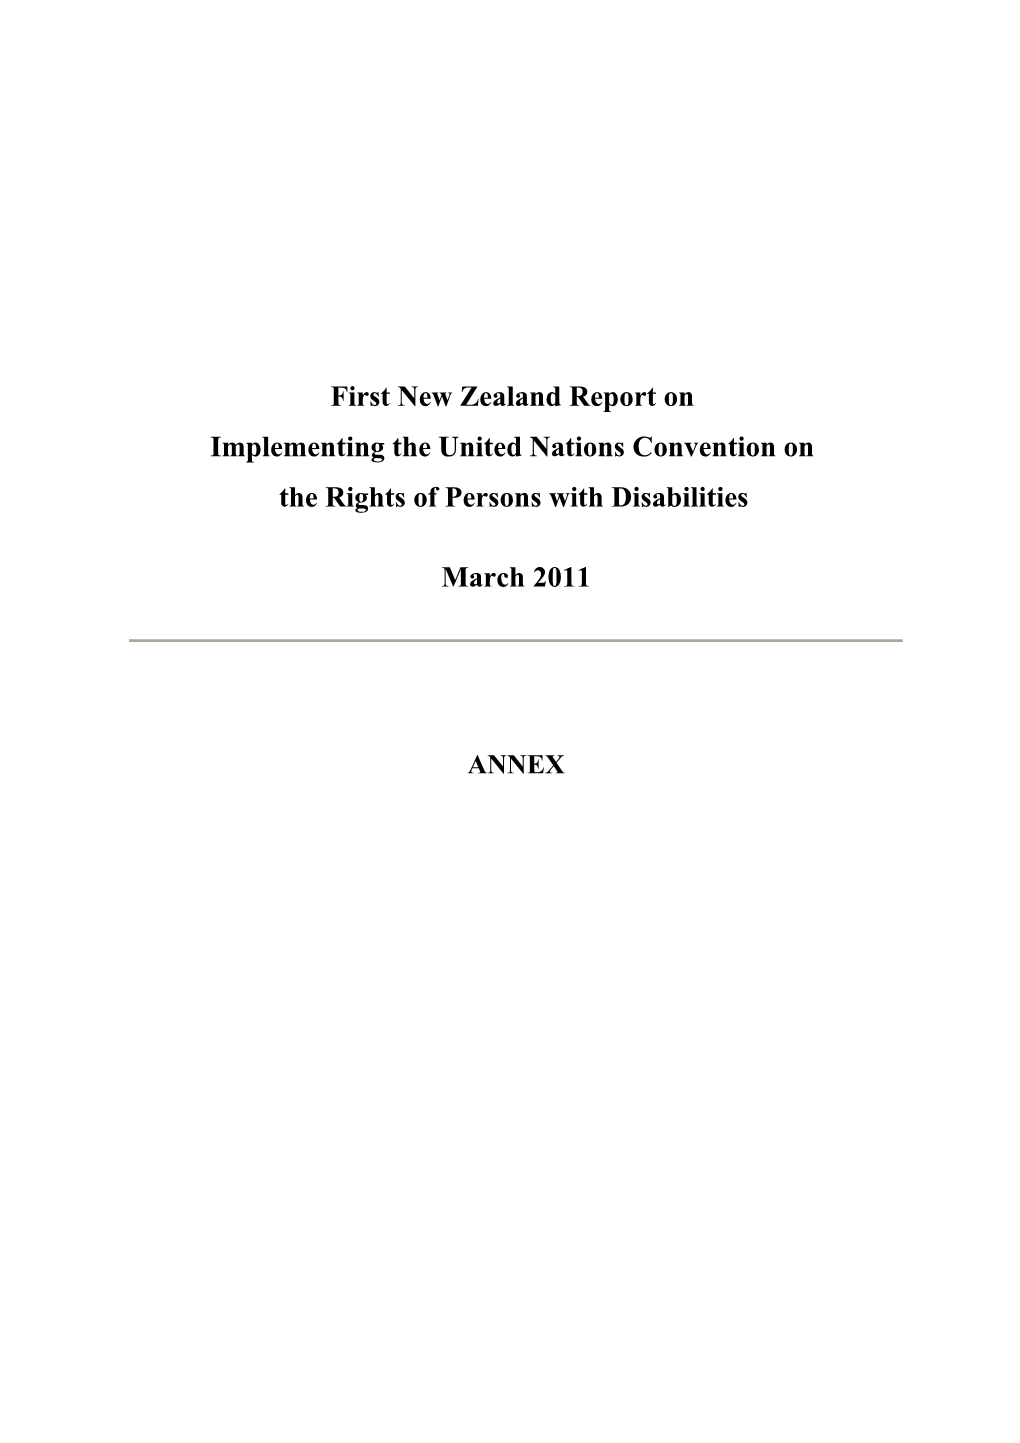 NZ 2011 UN Convention on Rights of Persons with Disabilities Annex